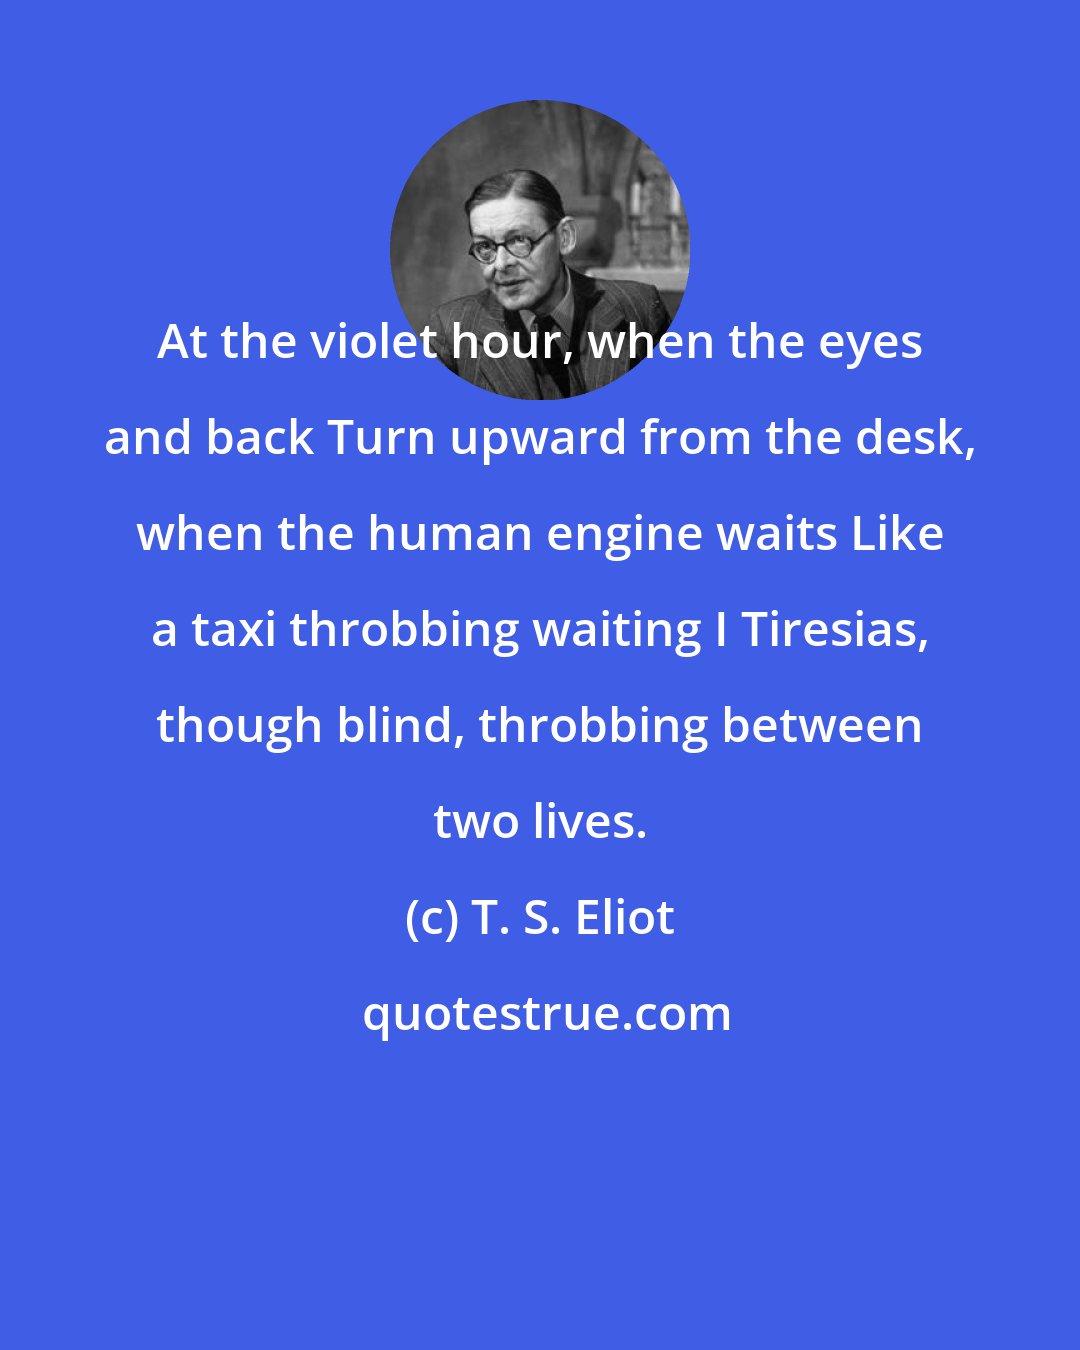 T. S. Eliot: At the violet hour, when the eyes and back Turn upward from the desk, when the human engine waits Like a taxi throbbing waiting I Tiresias, though blind, throbbing between two lives.